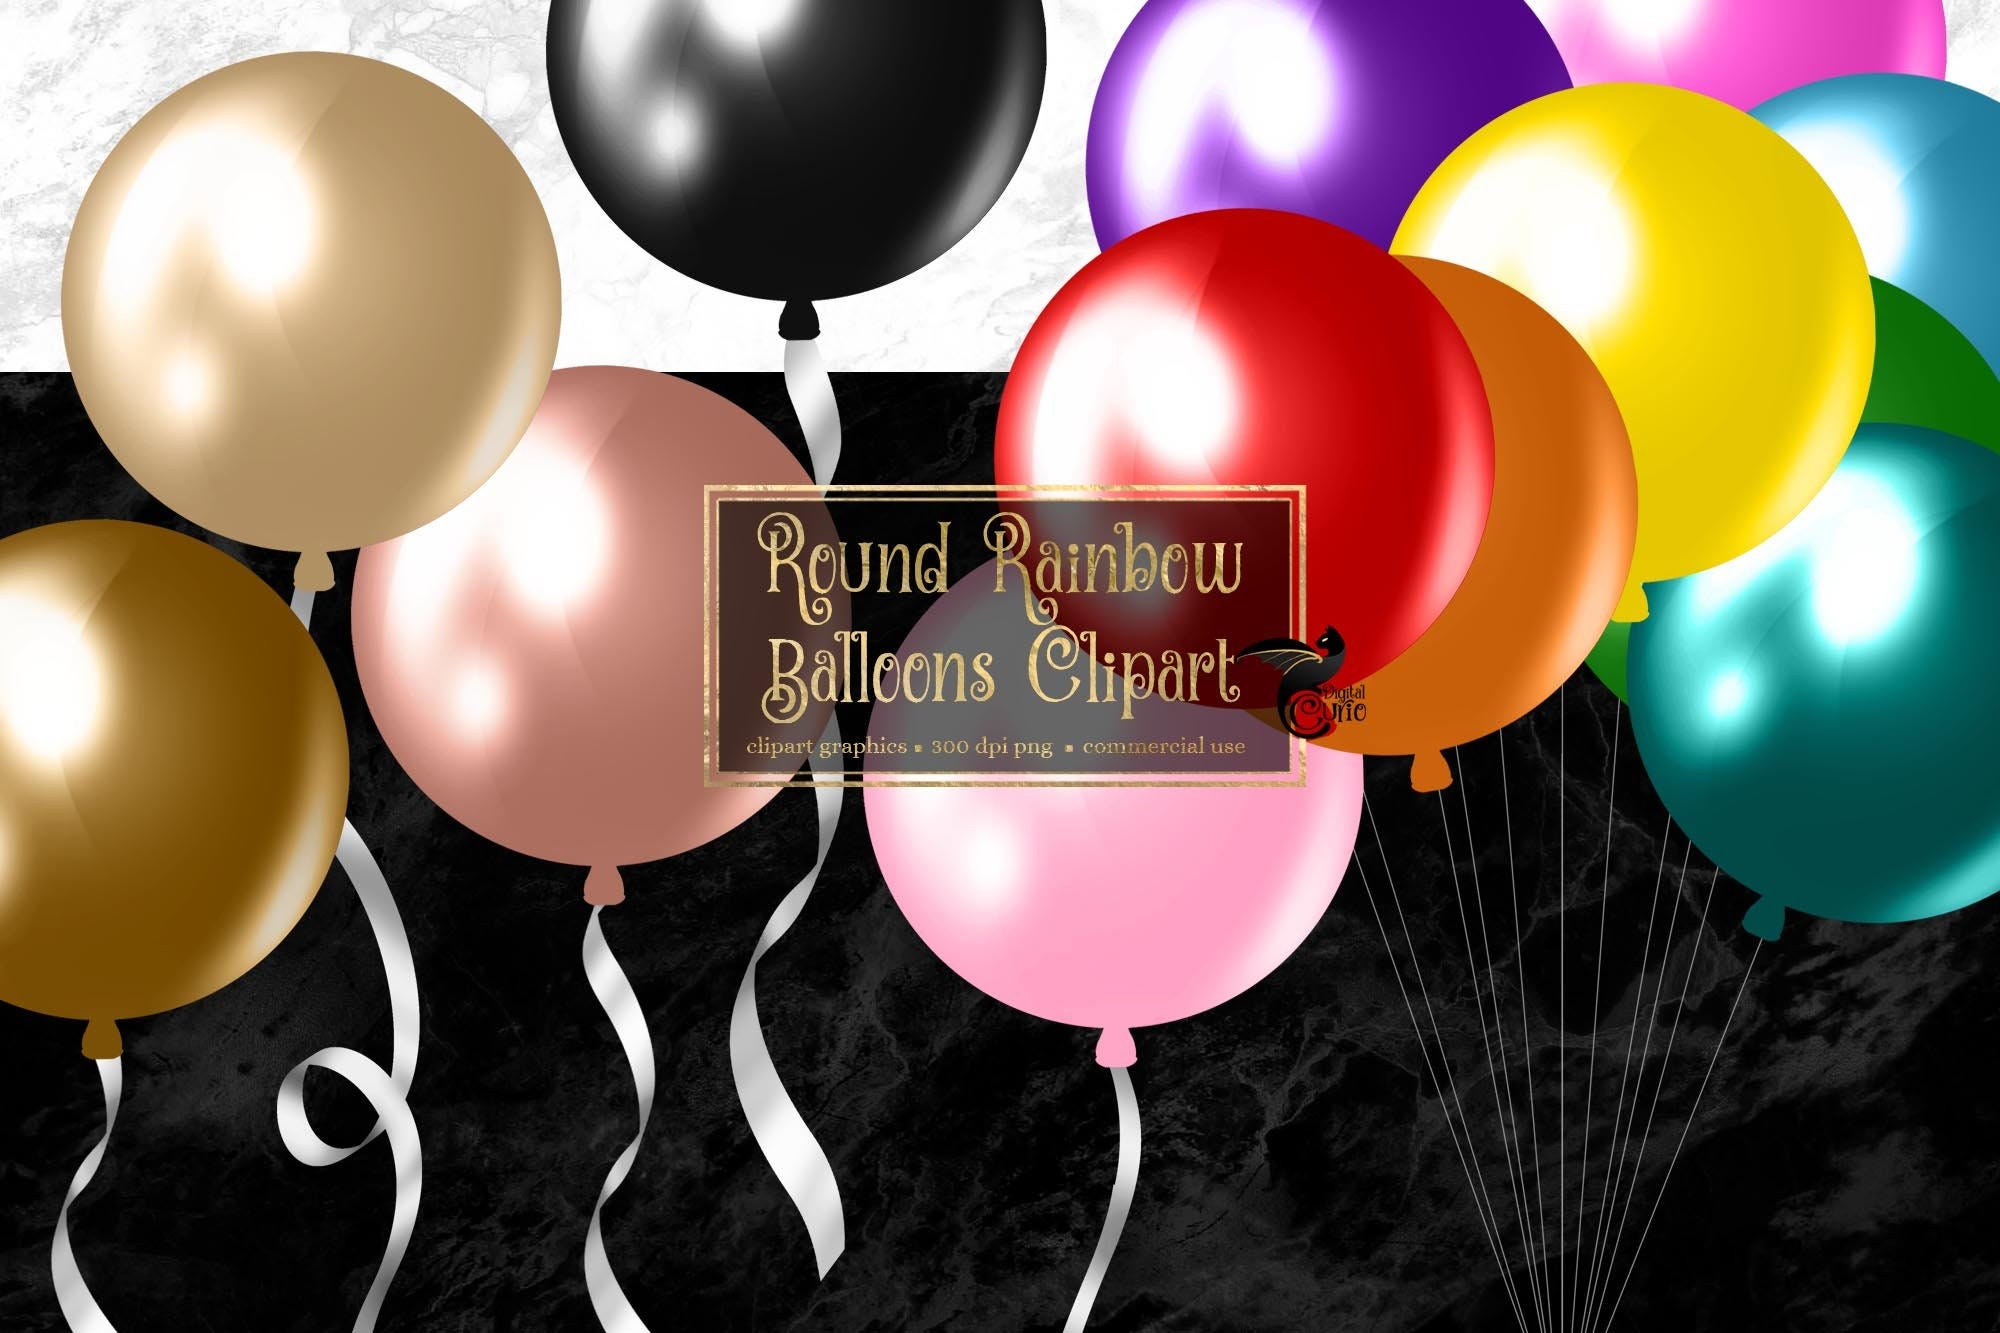 Round Rainbow Balloons Clipart - digital clip art graphics for party invitations and commercial use designs